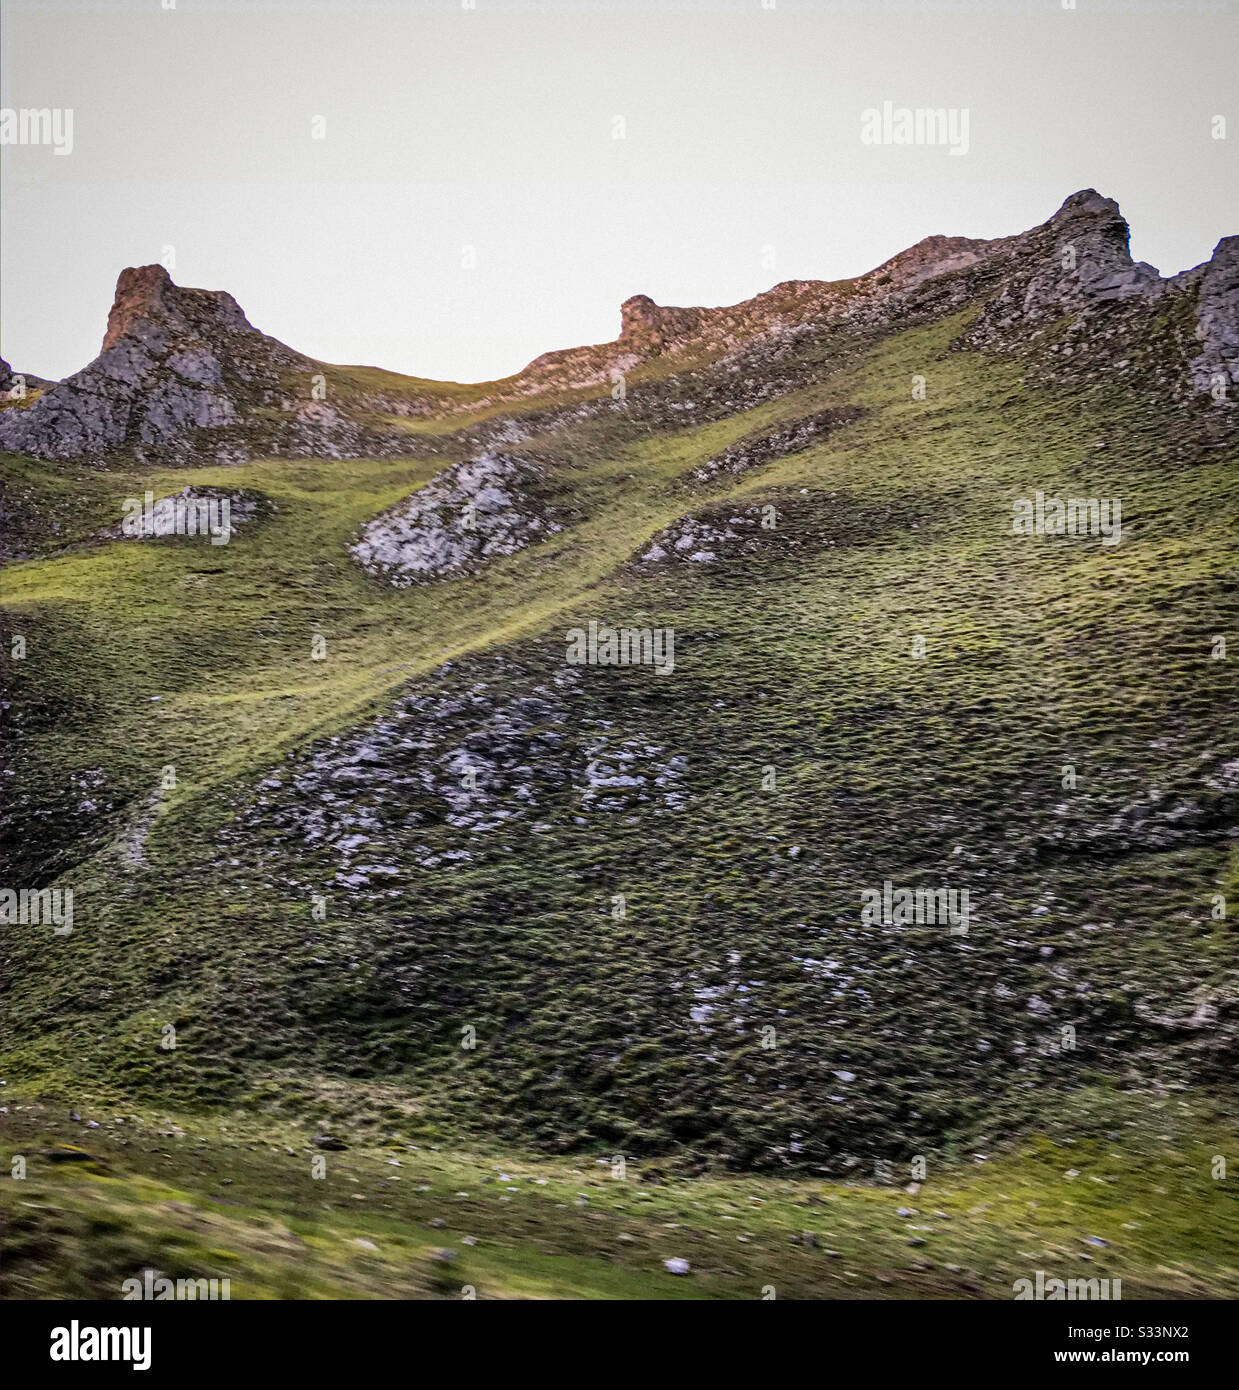 Craggy valley in the Peak District Stock Photo